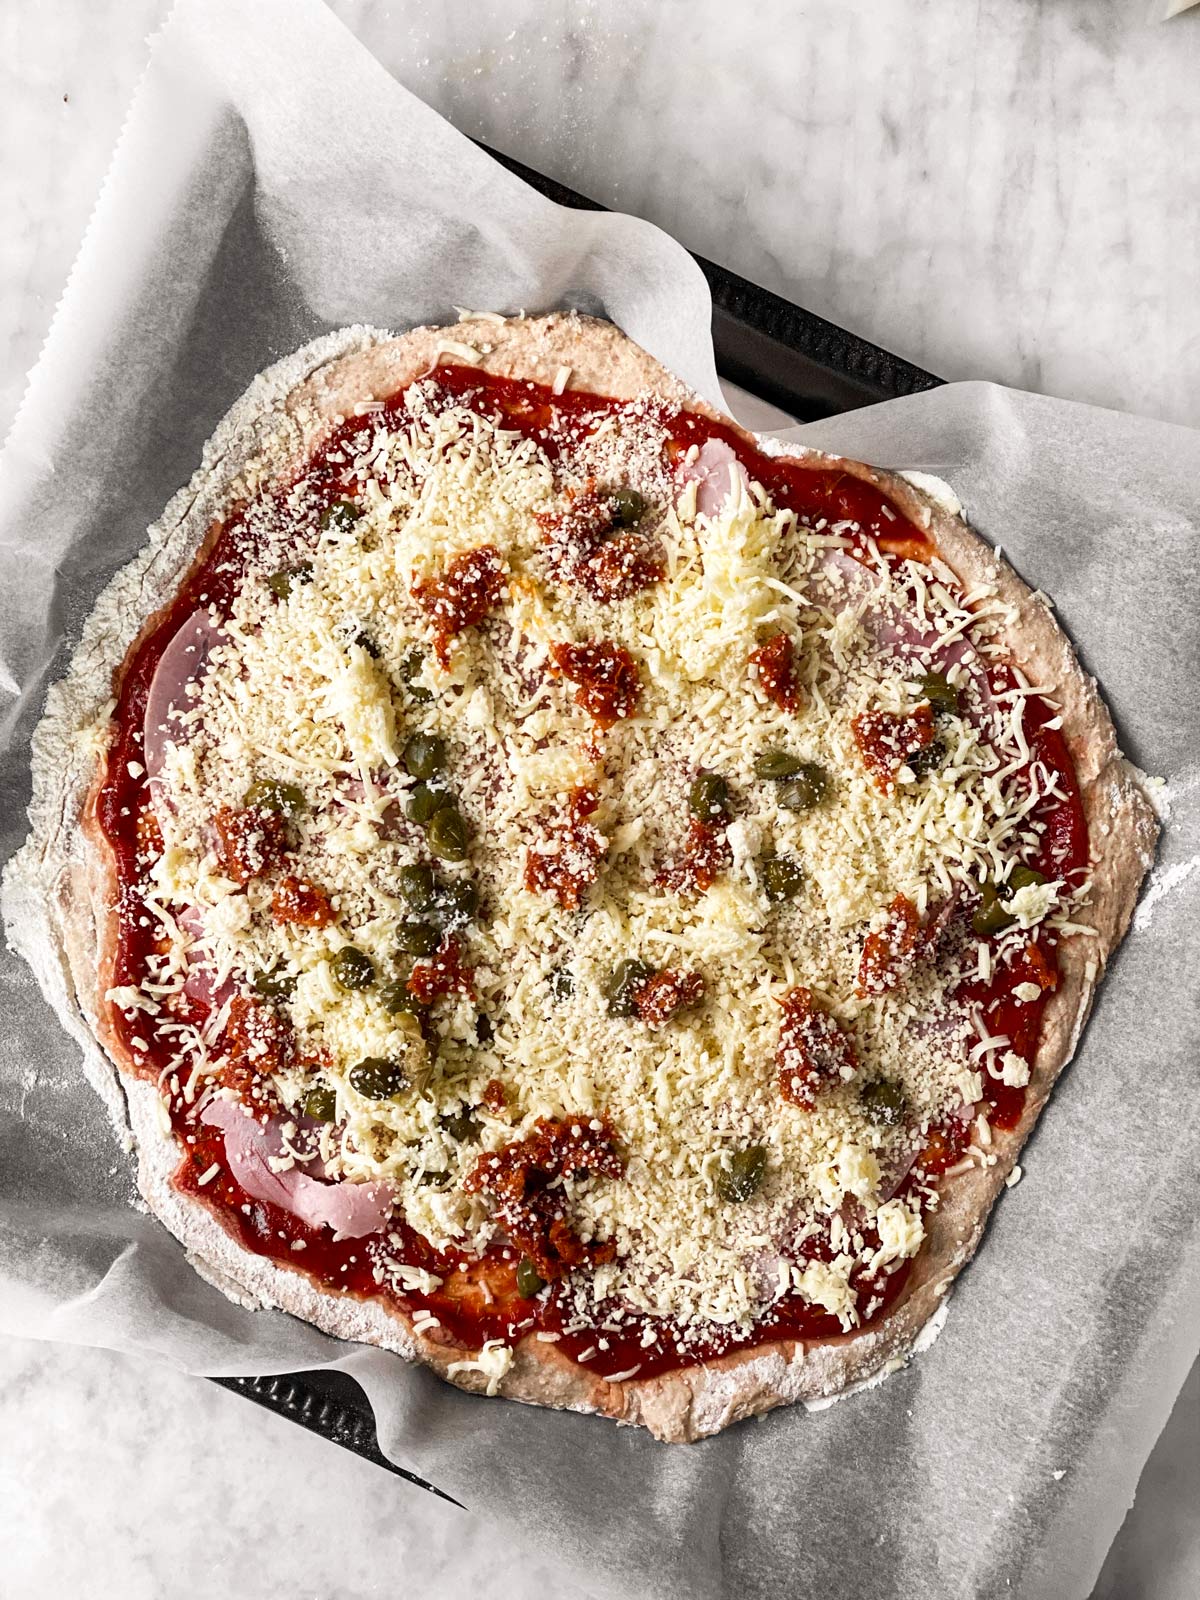 unbaked pizza on whole wheat crust